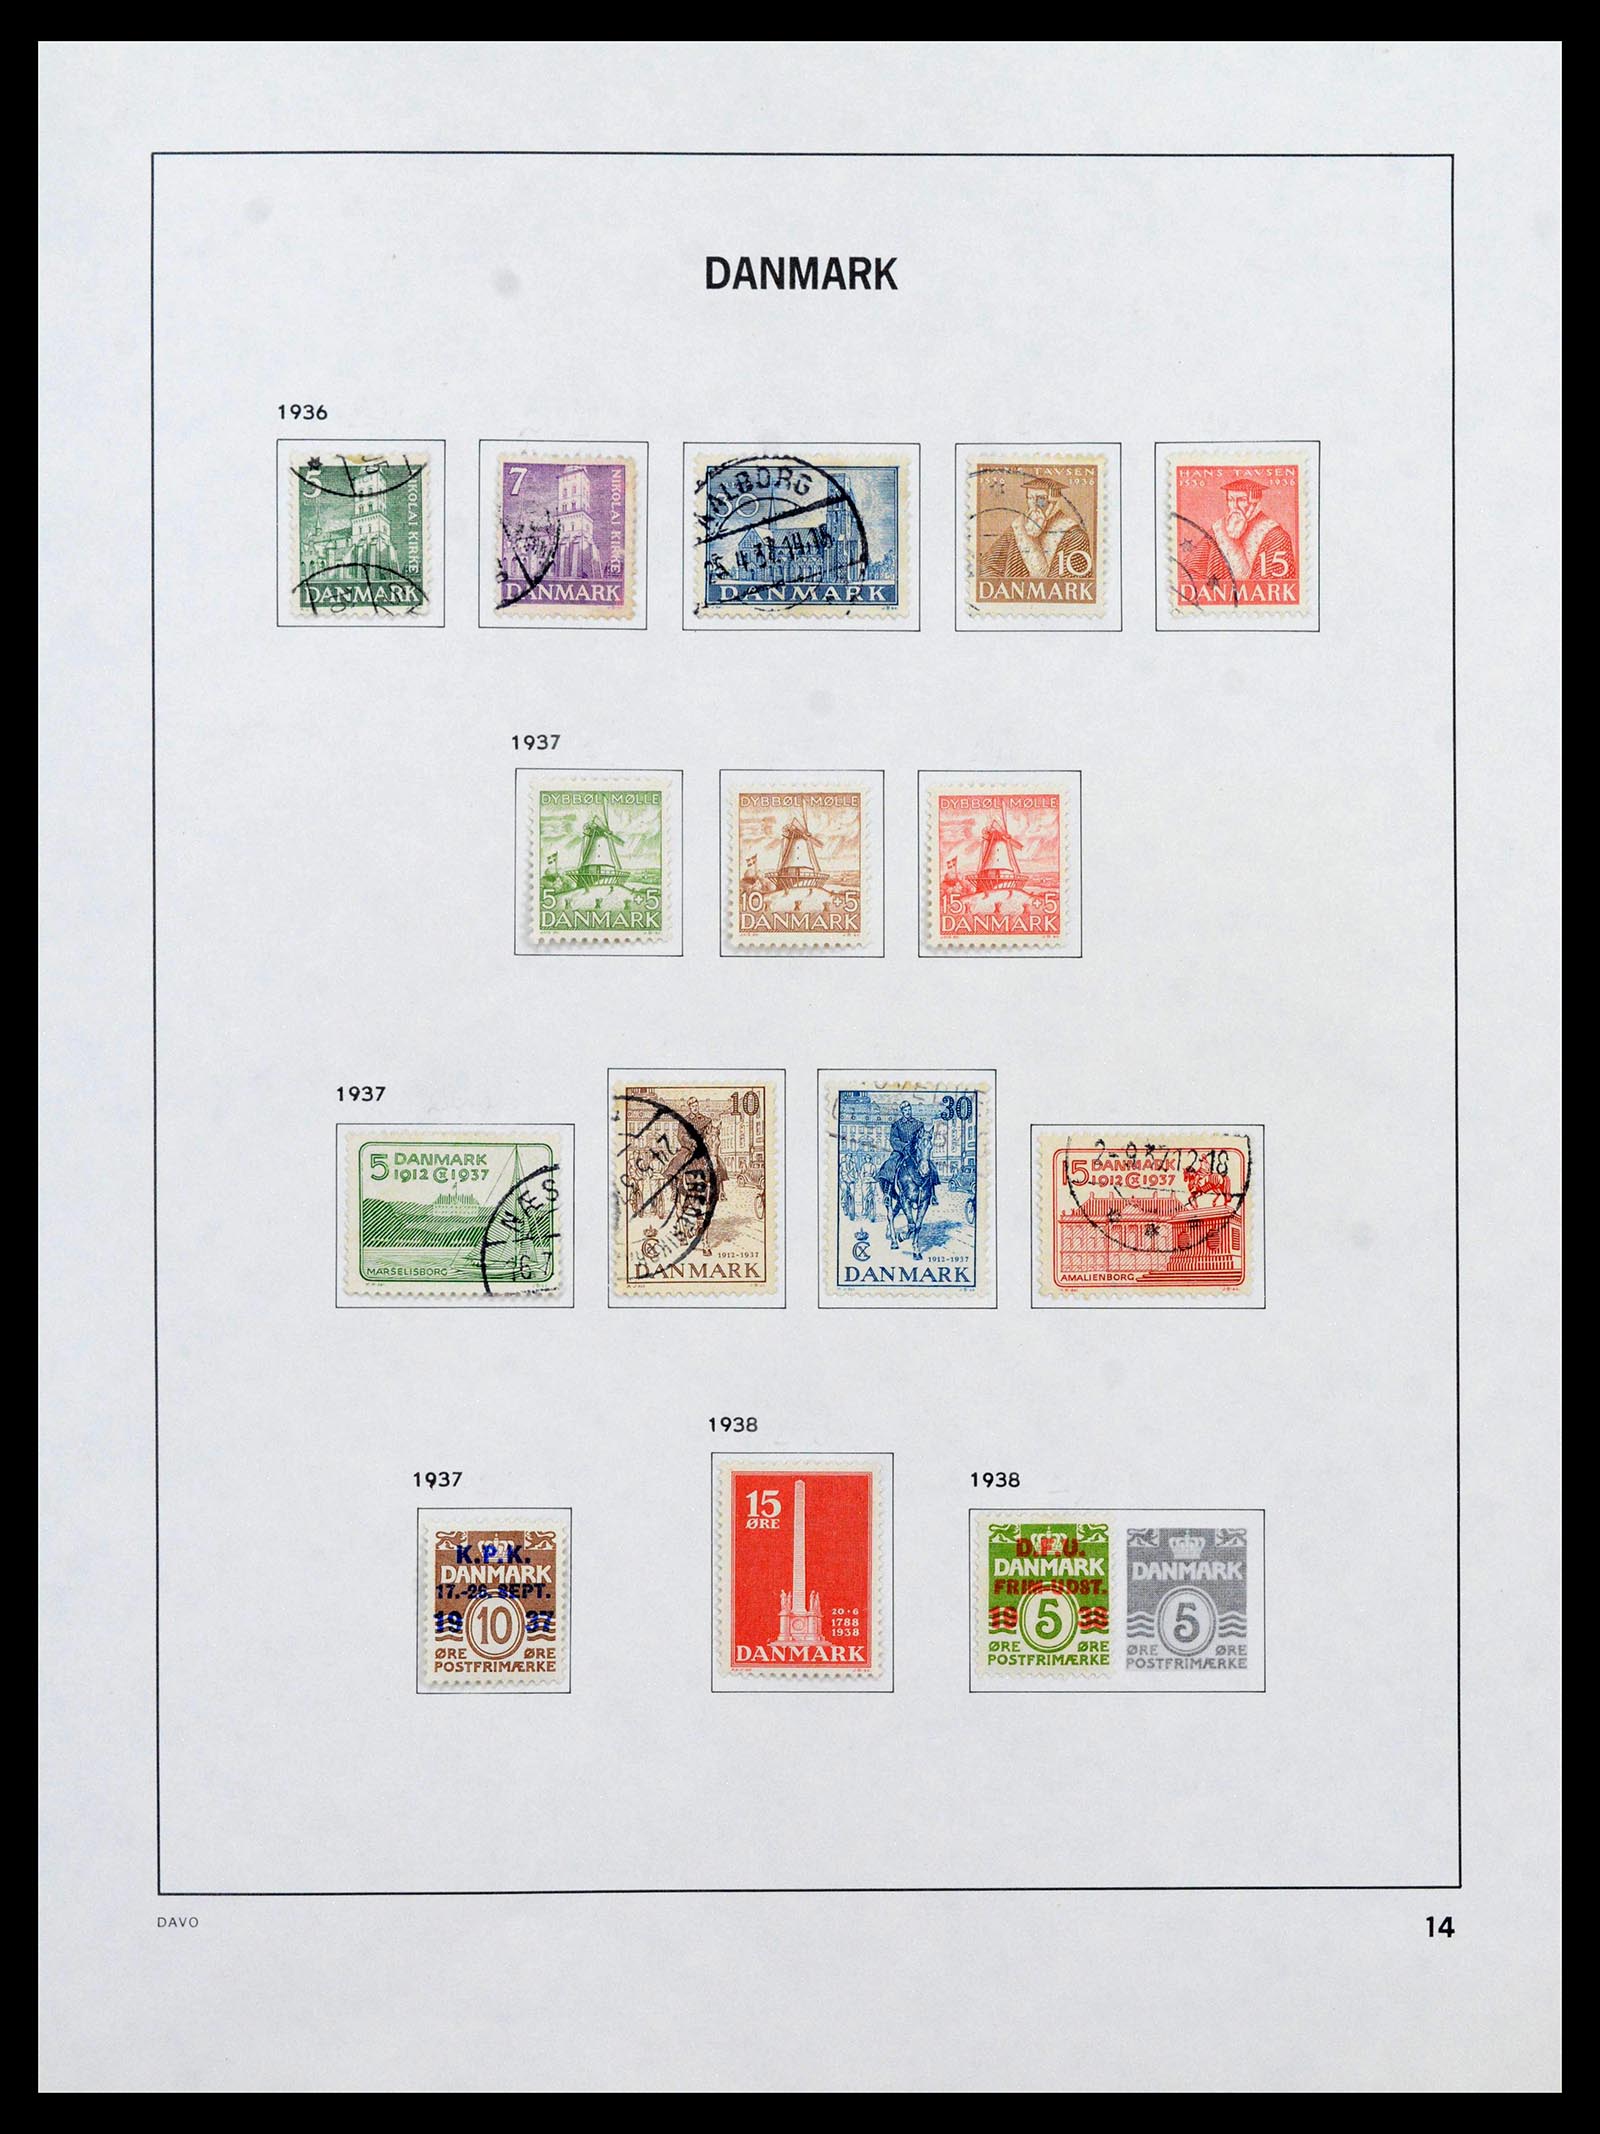 39428 0016 - Stamp collection 39428 Denmark 1851-2019.